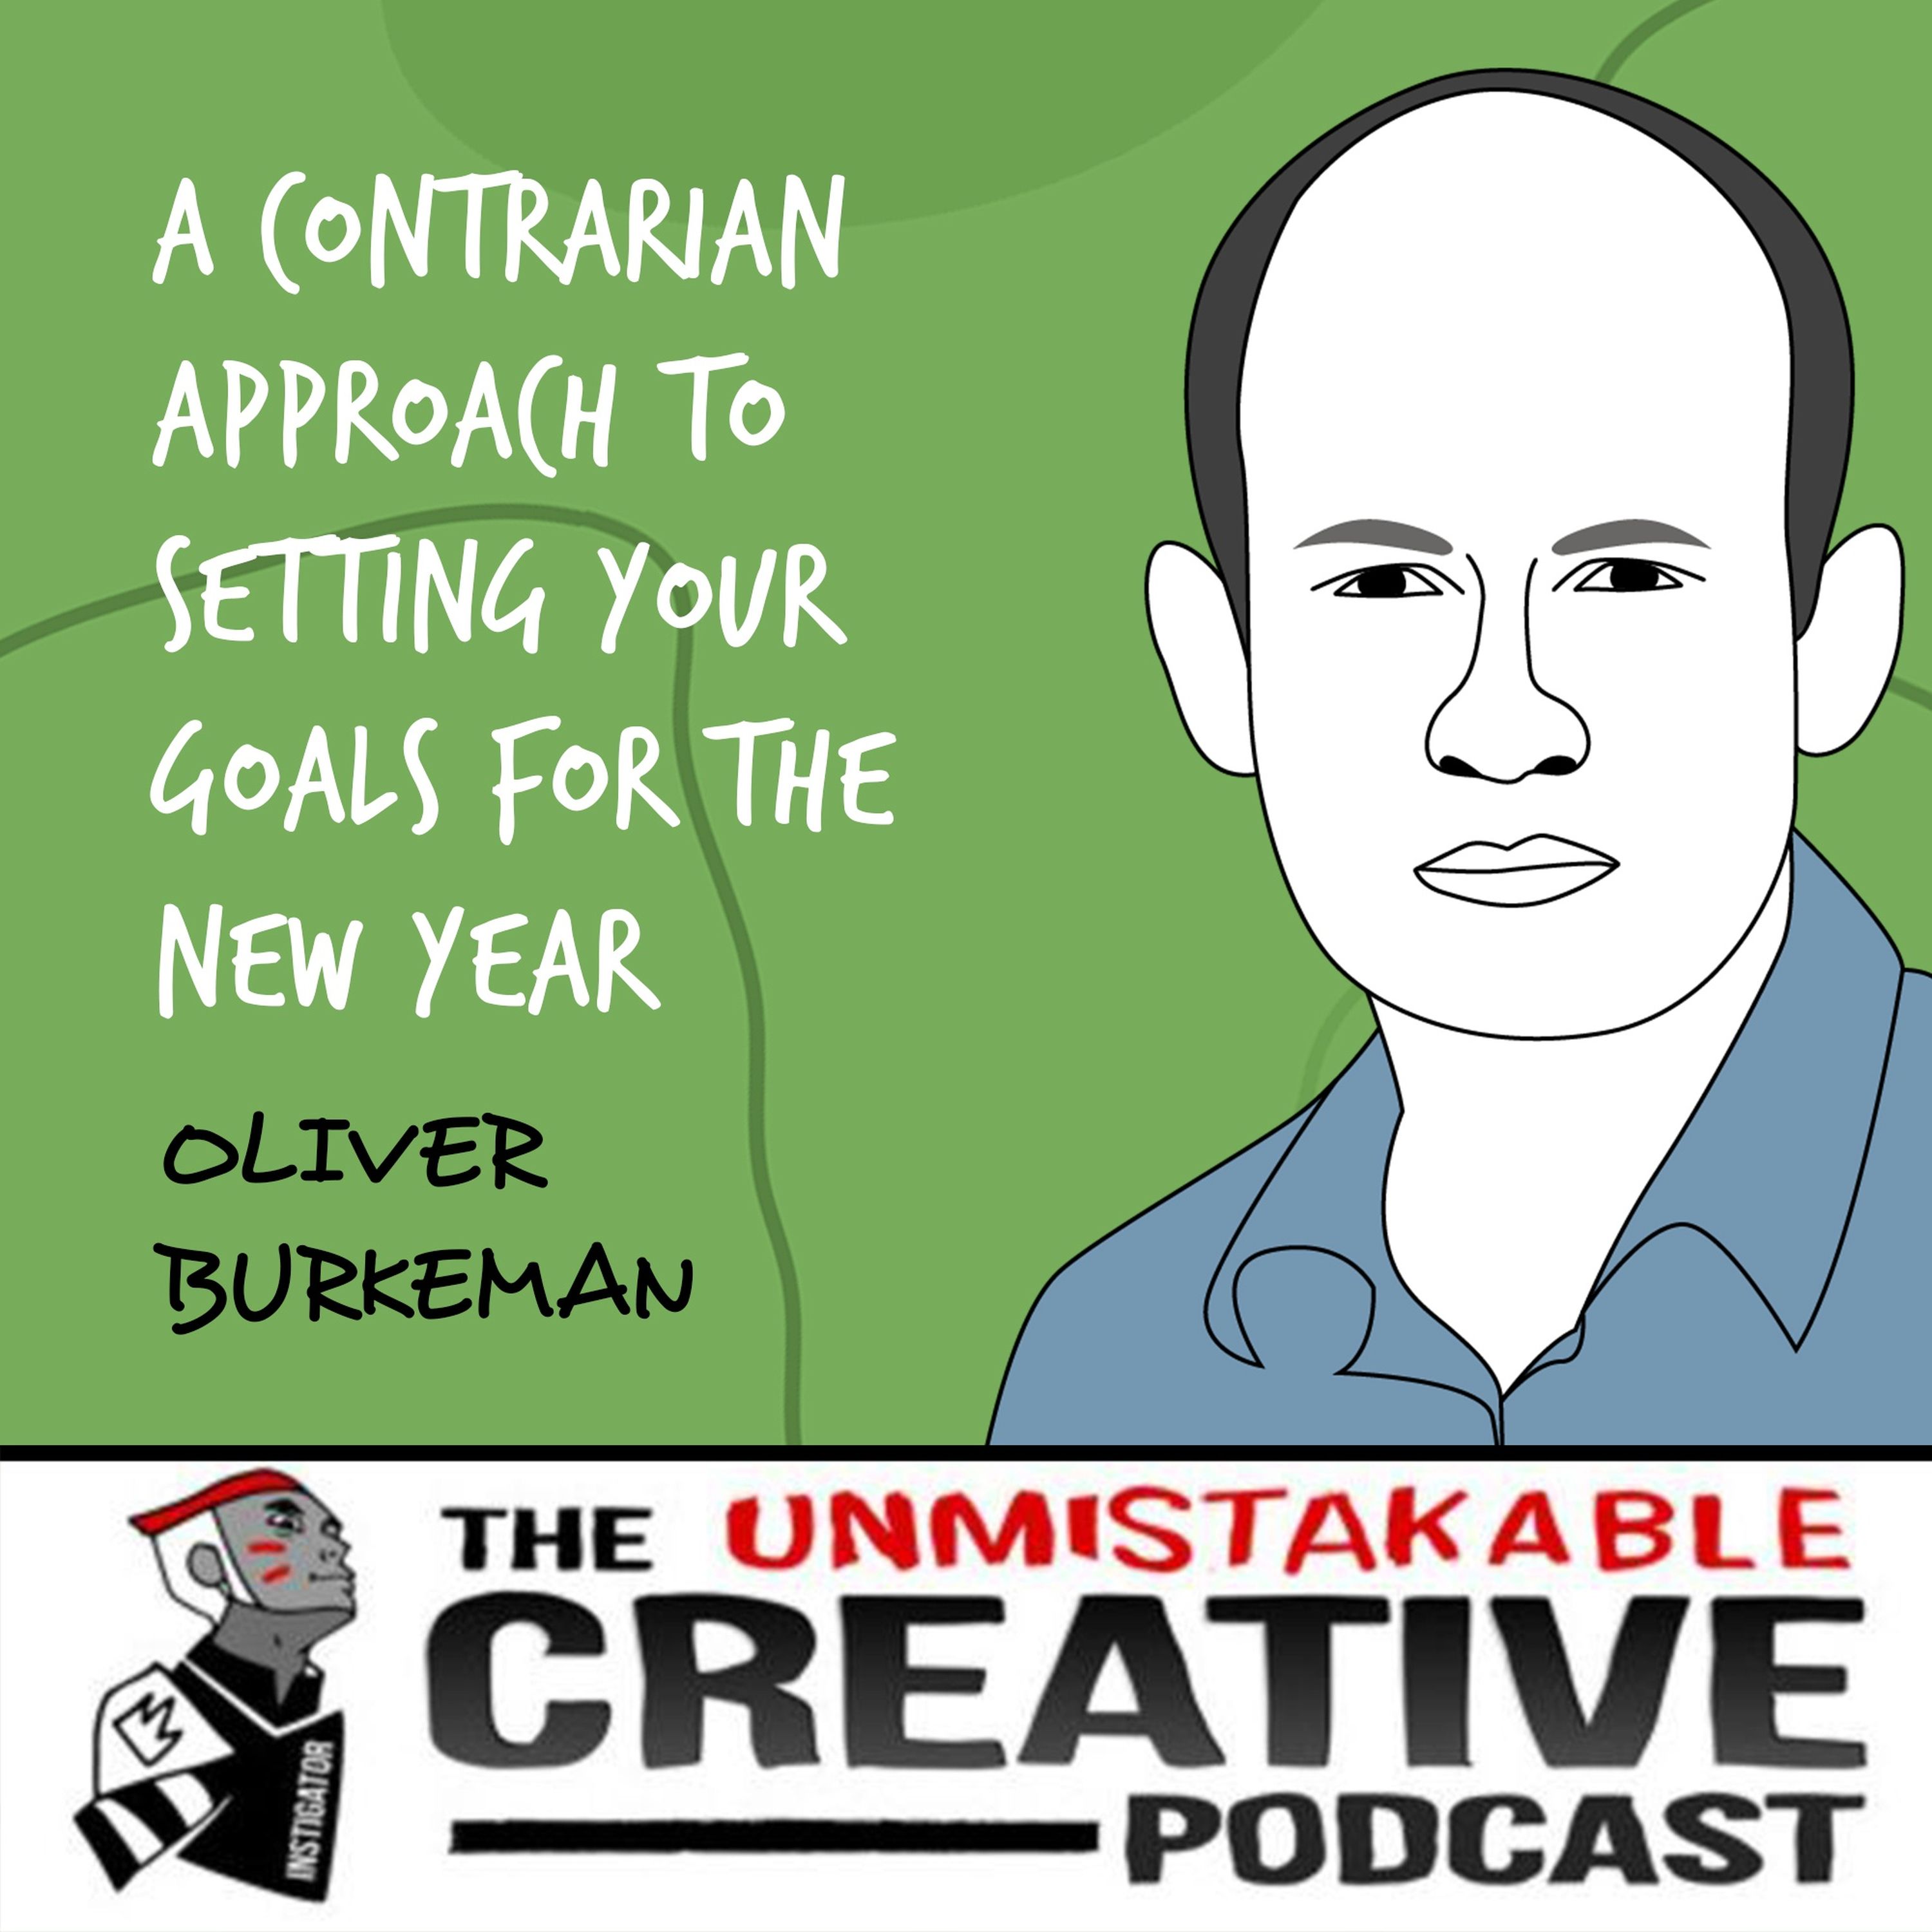 Oliver Burkeman | A Contrarian Approach to Setting Your Goals for the New Year